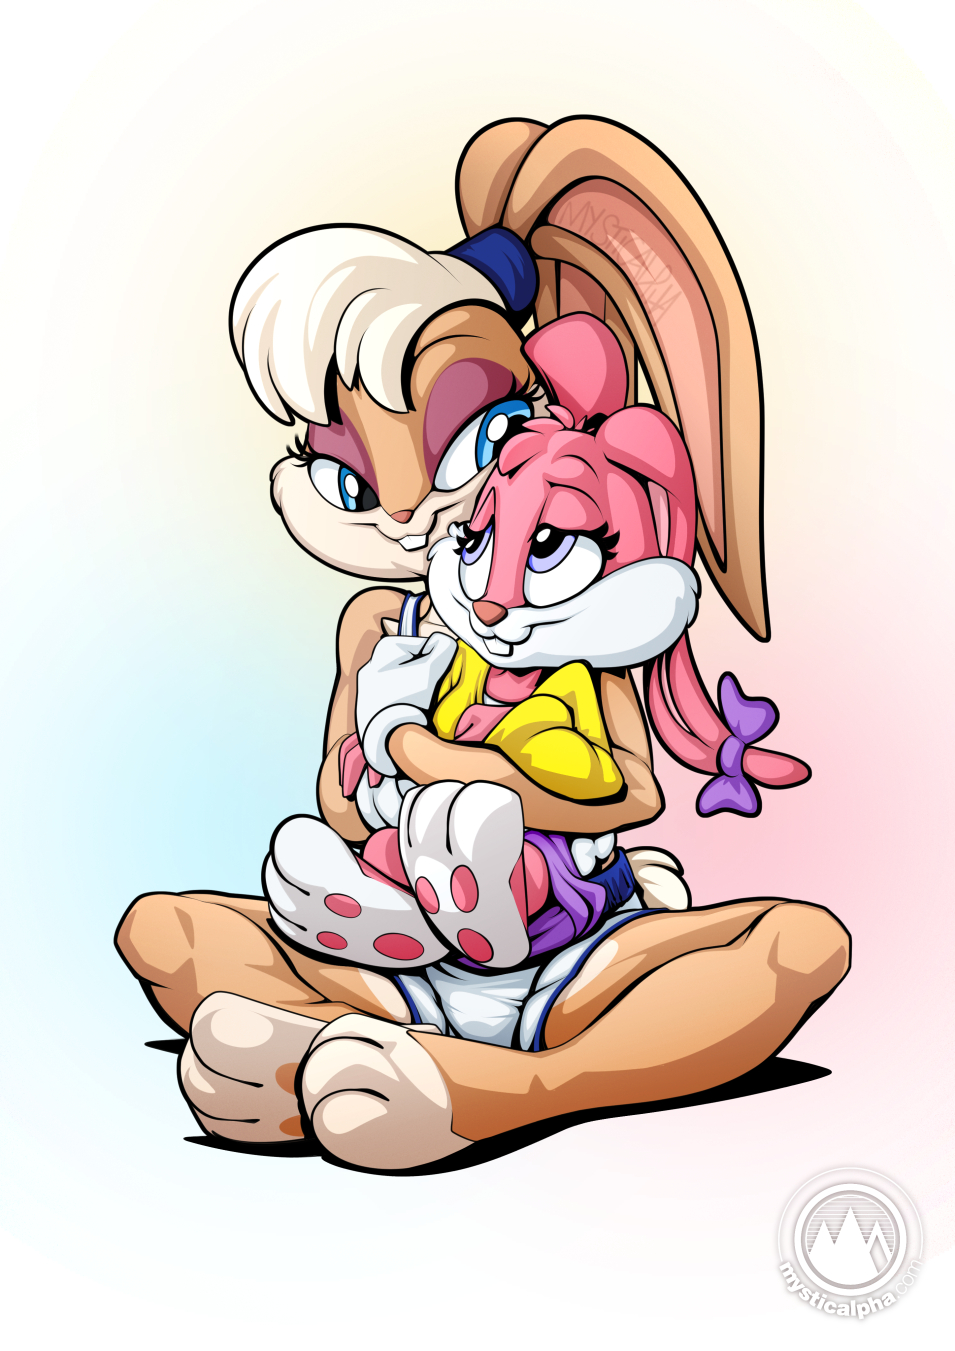 Lola and Babs Bunny